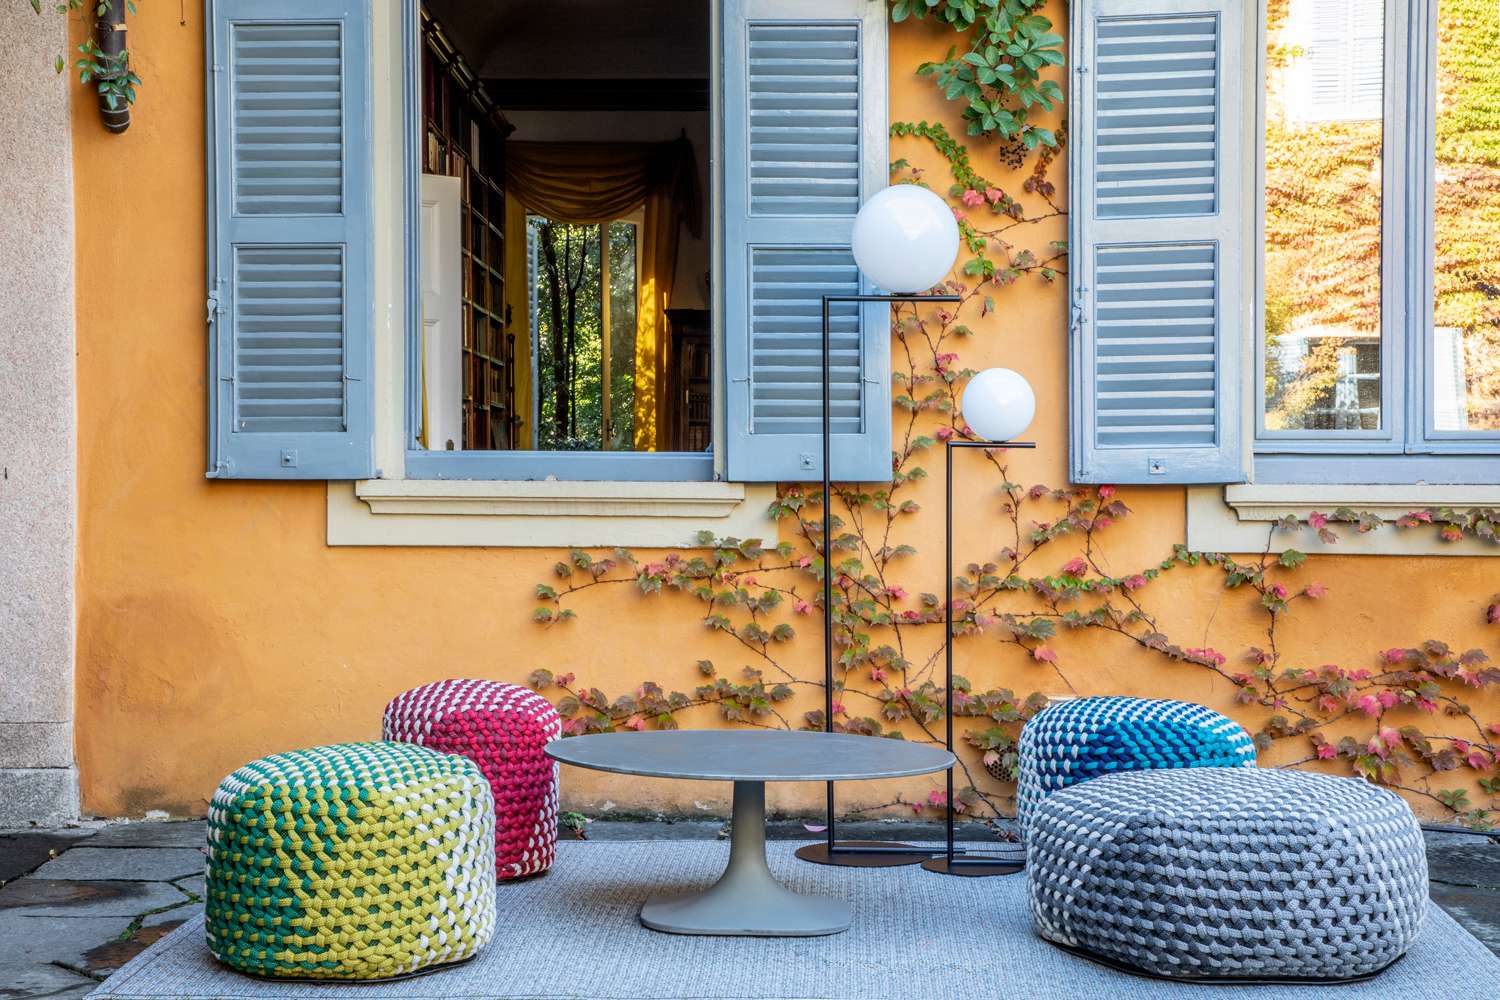 New 2020 B&B Italia Outdoor Collection - Gallery